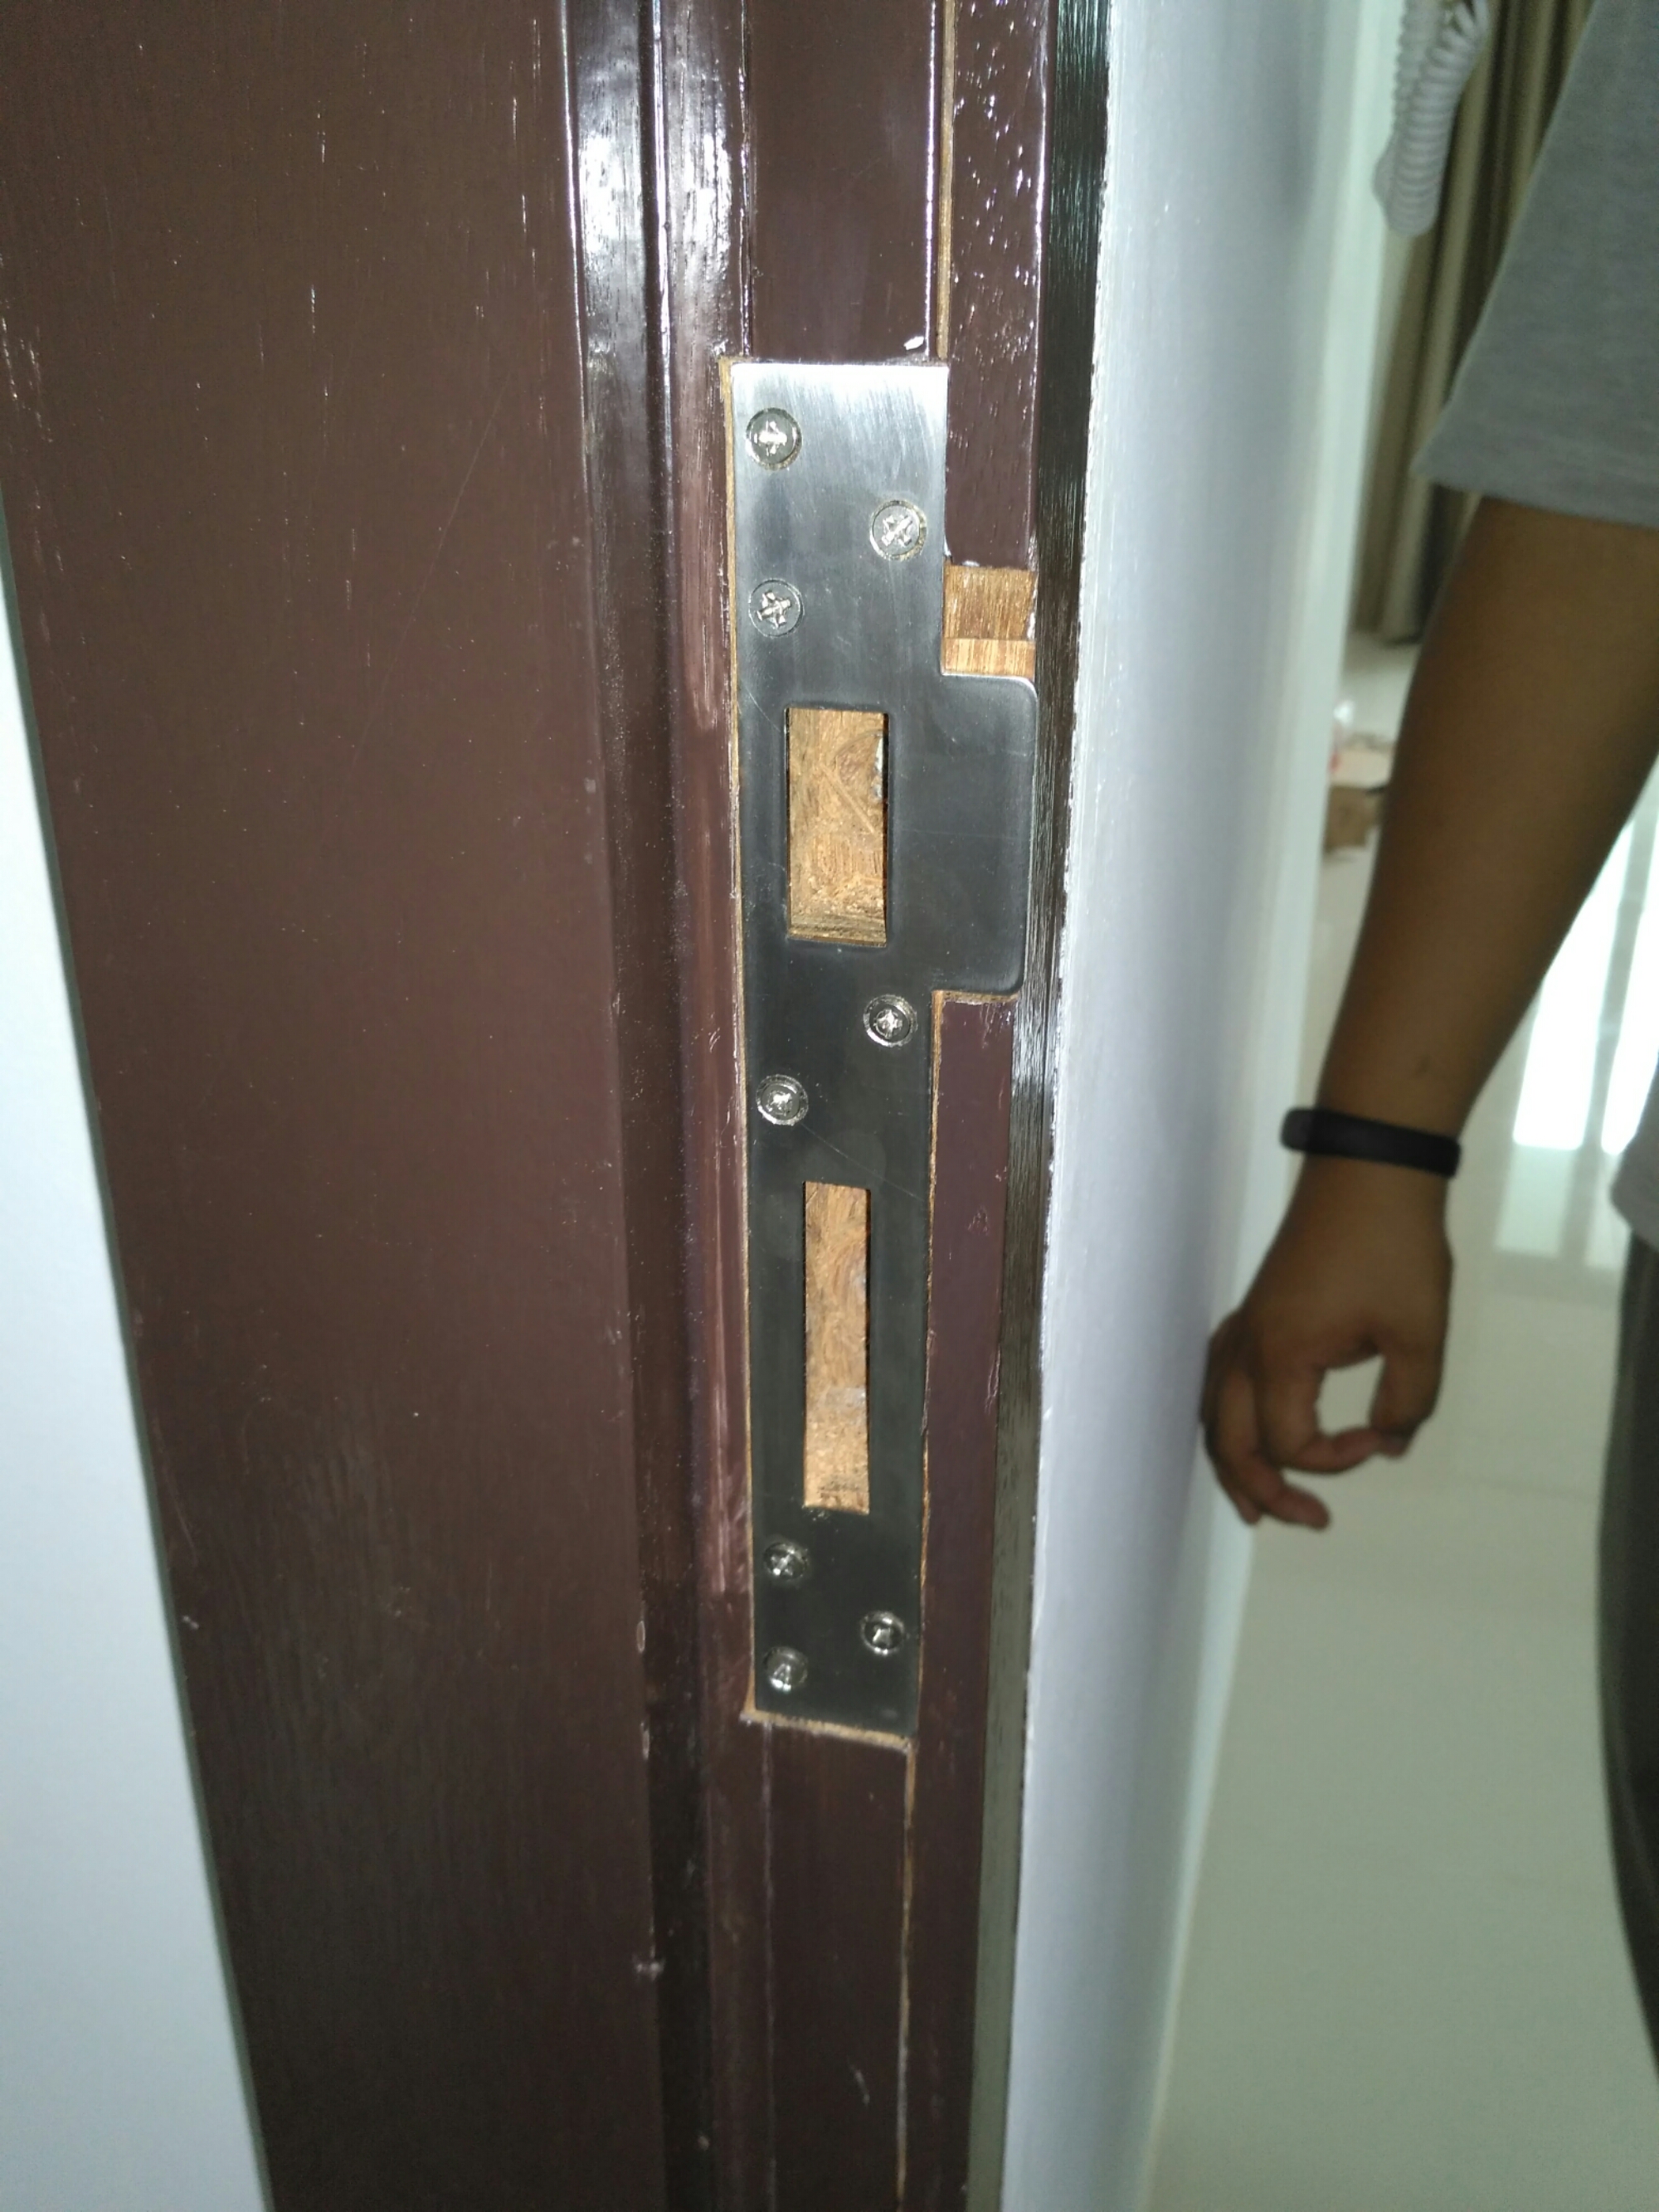 Unknown but Simple and Effective Way to Greatly Increase Door Lock Strength